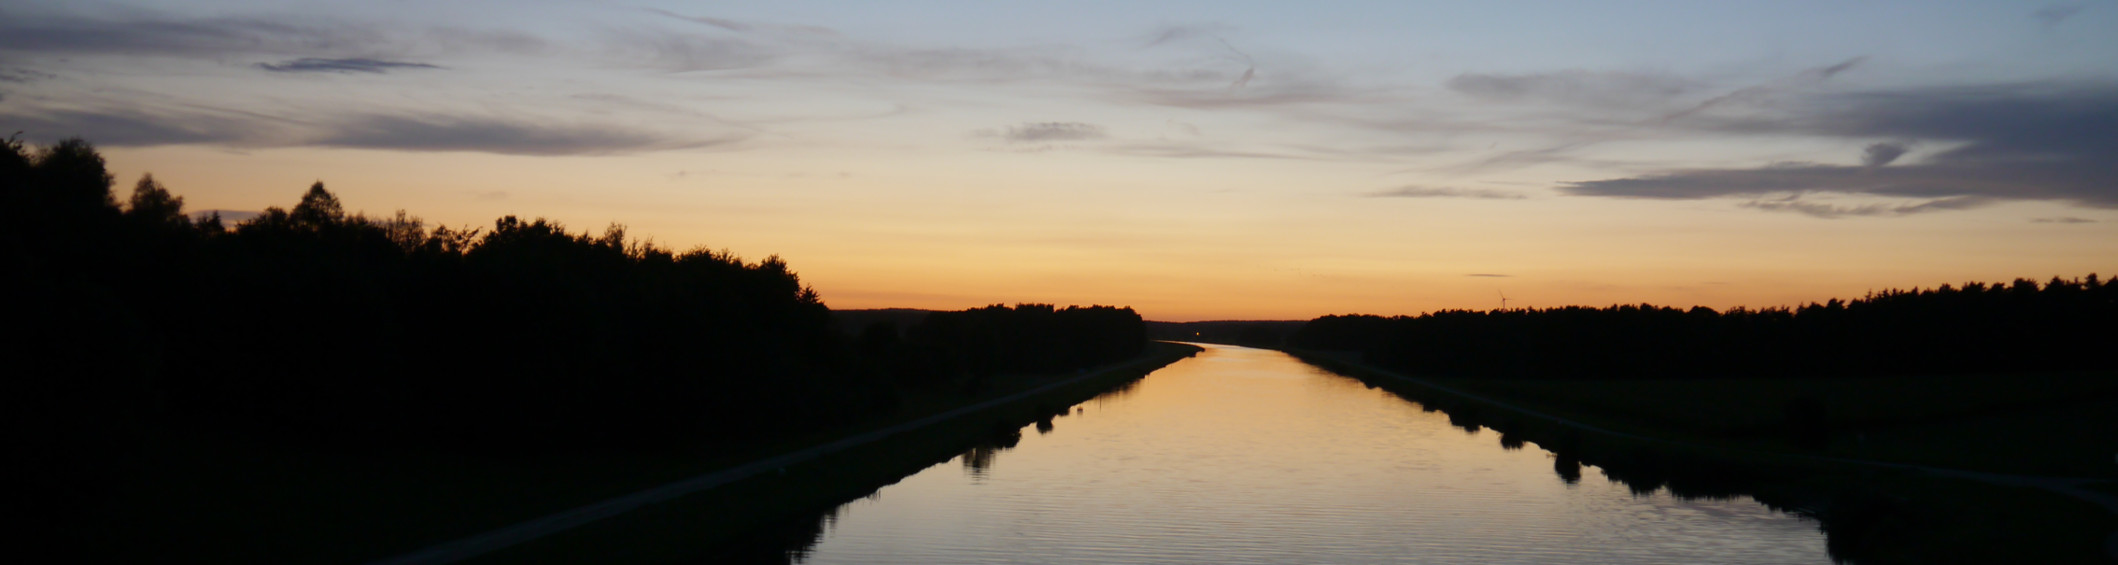 River in sunset